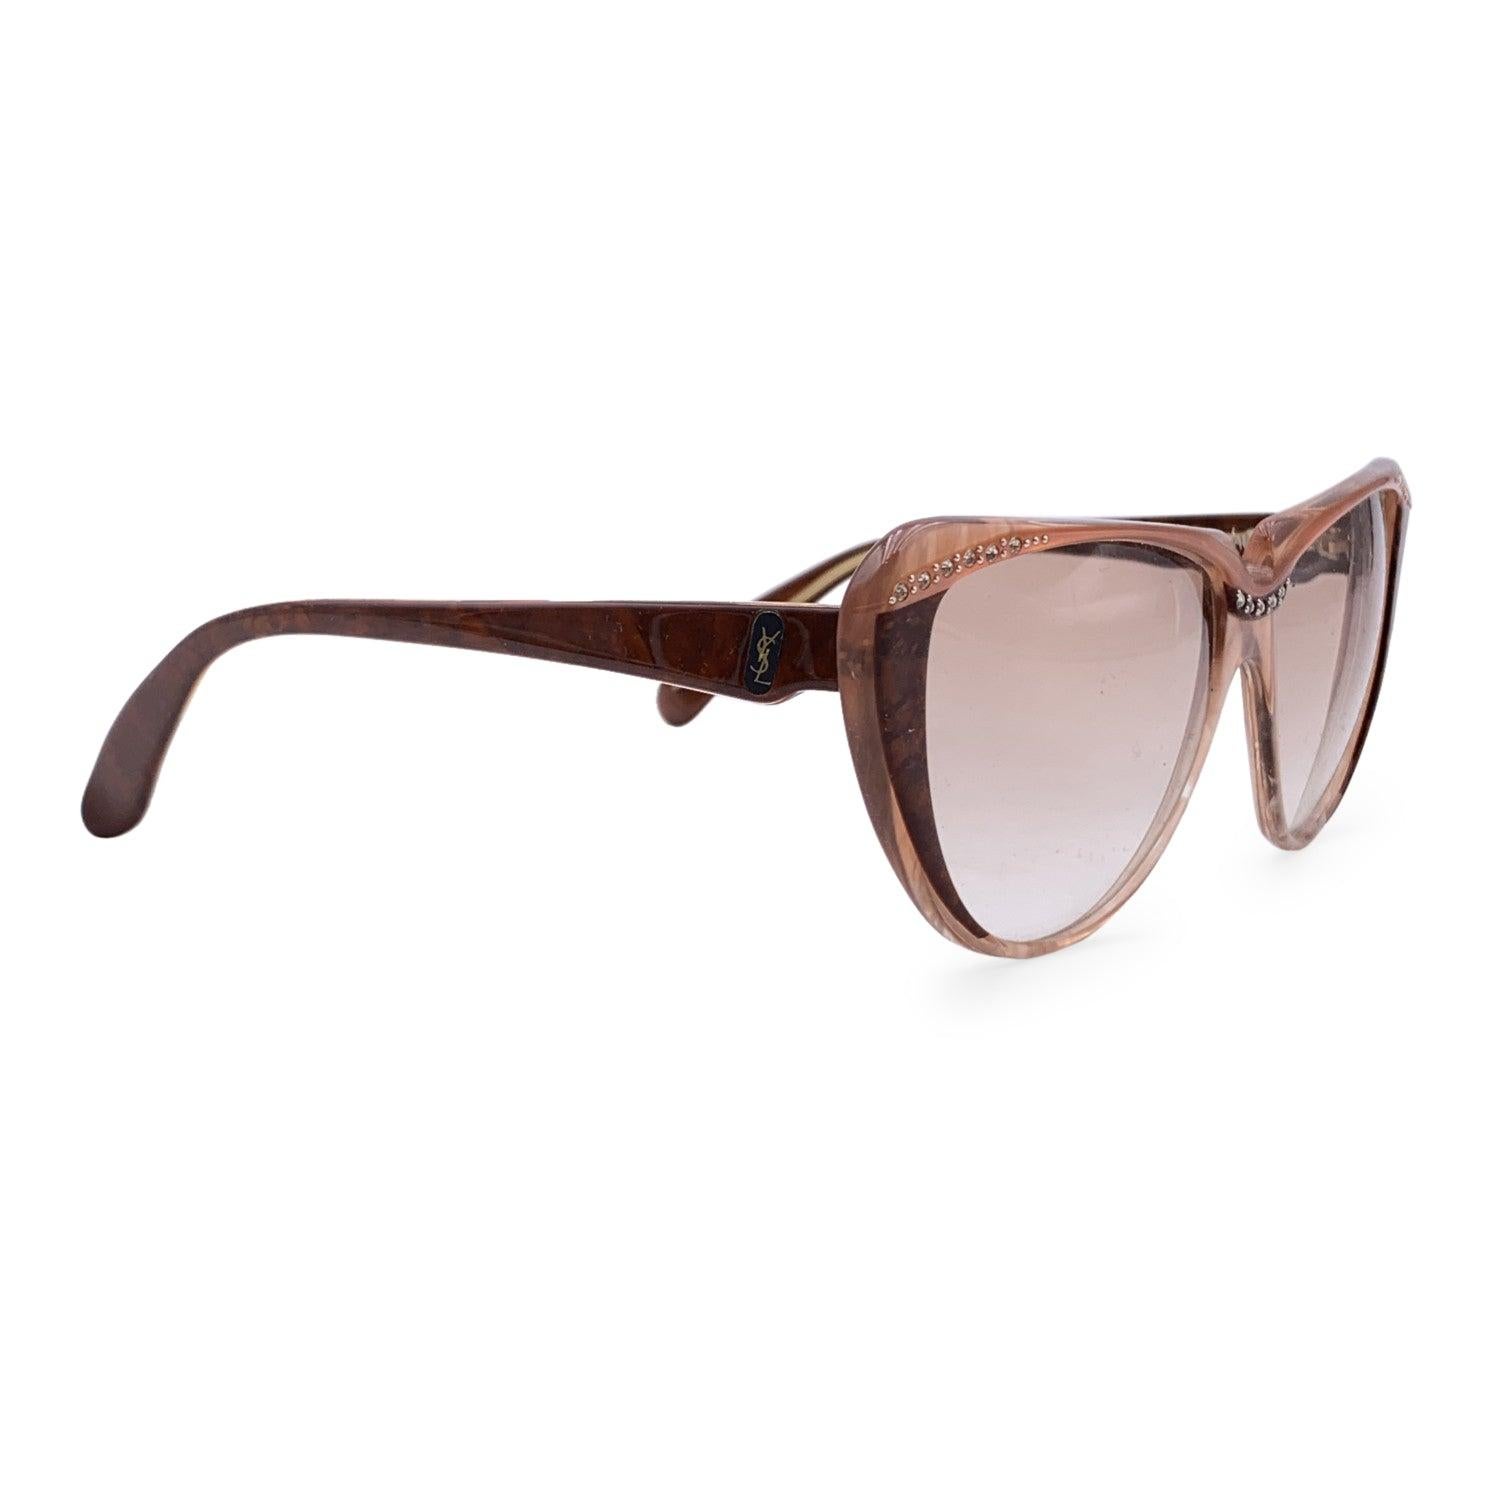 Cat-eye vintage sunglasses by YVES SAINT LAURENT from the 80s, Mod. 8704 PO 74. Brown frame embellished with small rhinestones on the nose bridge and on corners. Hand-Made in France. YSL logos on the side. New 100% UV protection brown gradient